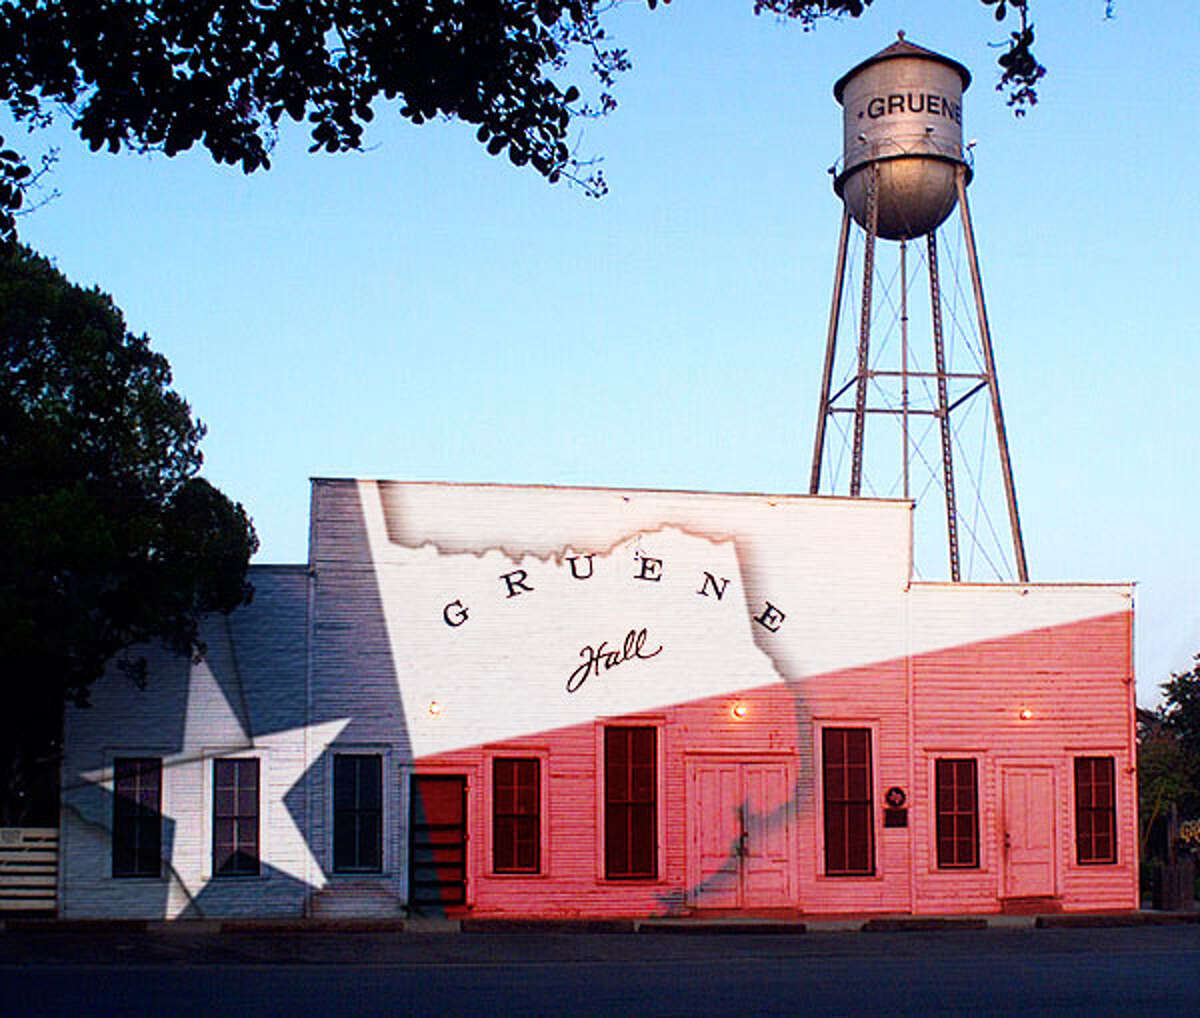 Gruene Hall will be celebrating the 178th Texas Independence Day. (Courtesy Gruene Hall)